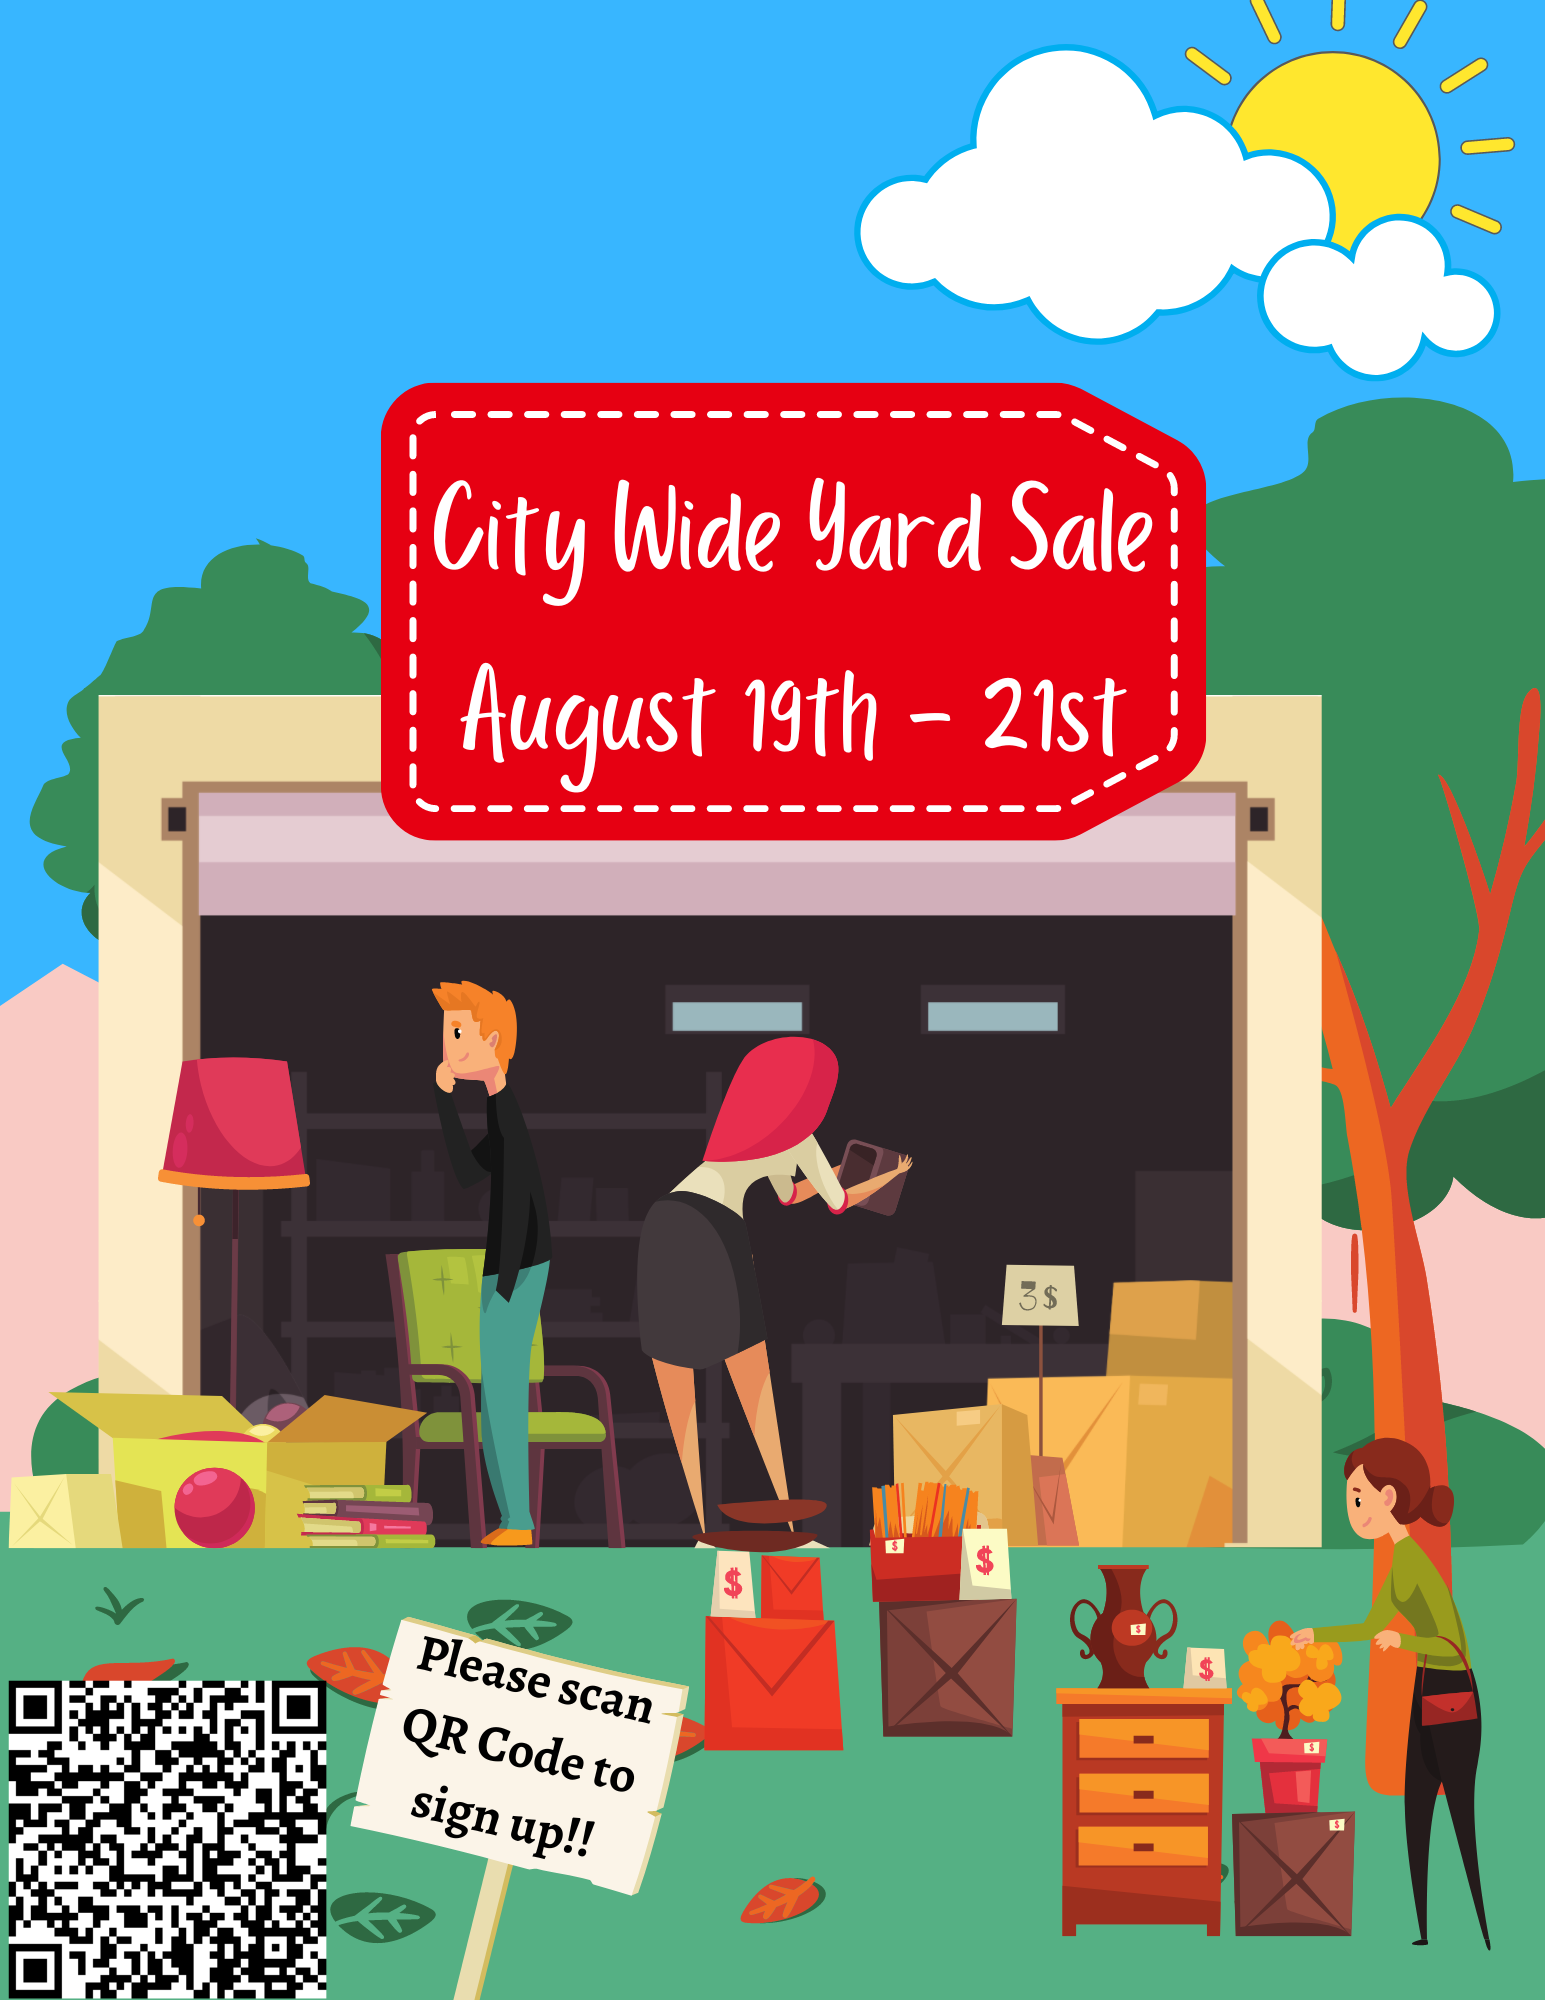 City Wide Yard Sale August 19th - 21st (Newsletter)